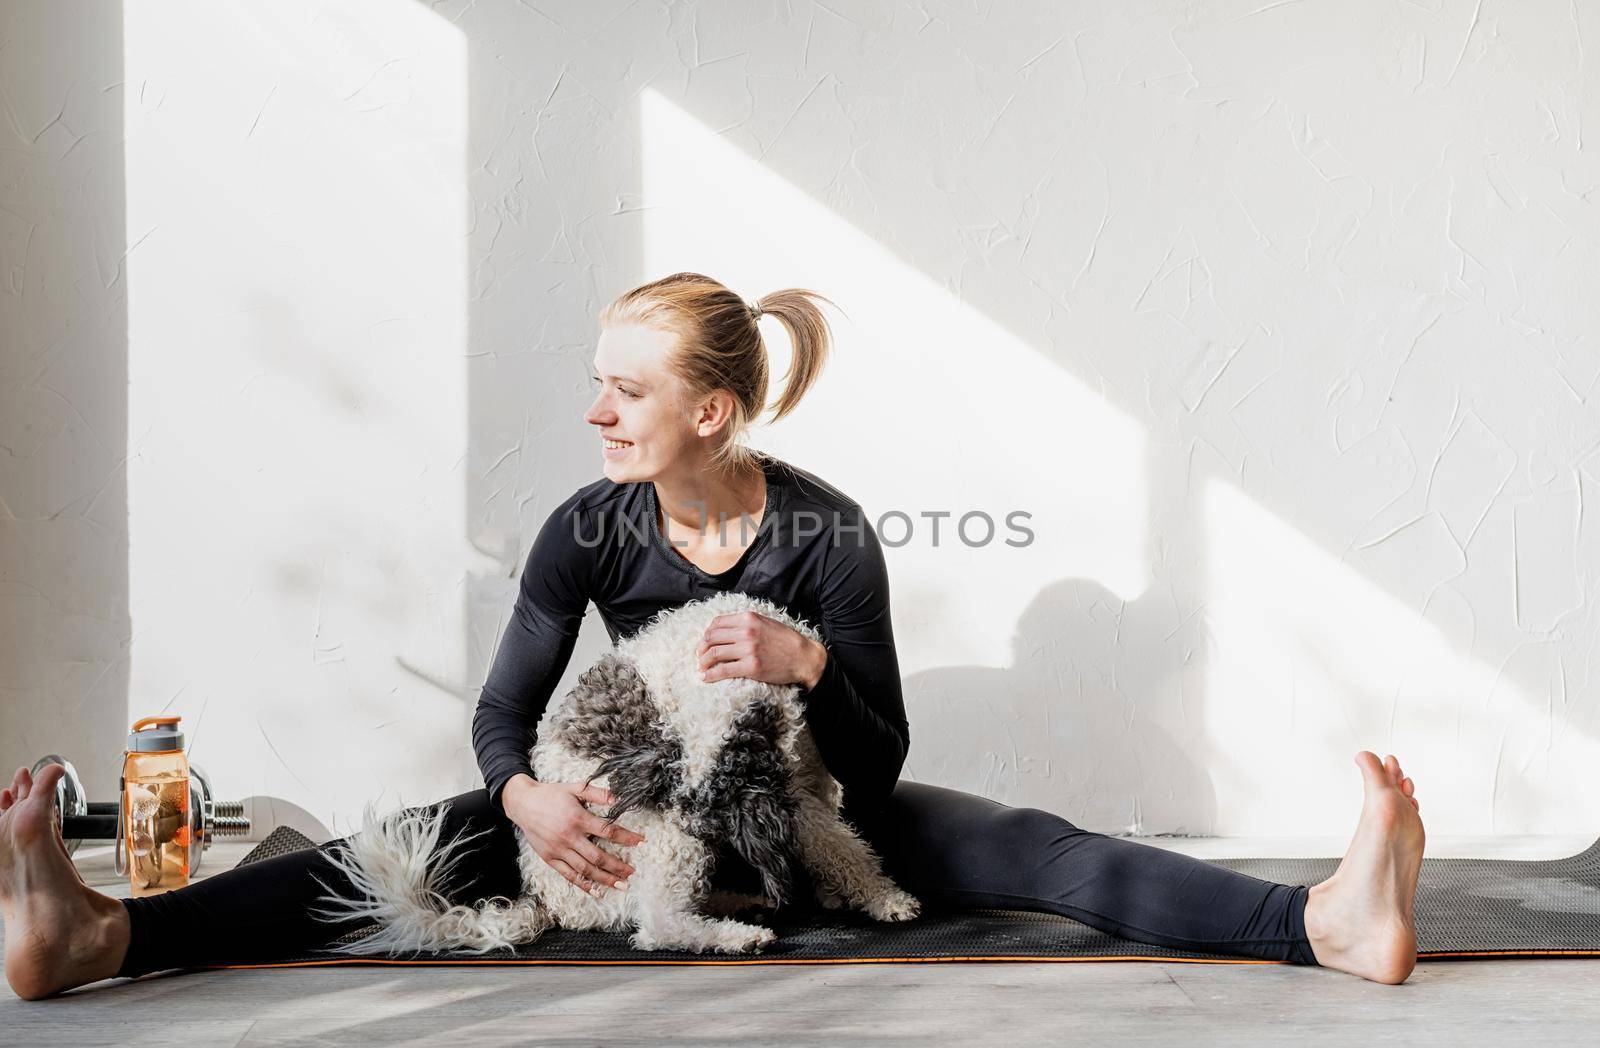 Healthy lifestyle. Sport and fitness. Happy young blond woman patting her dog at the home gym